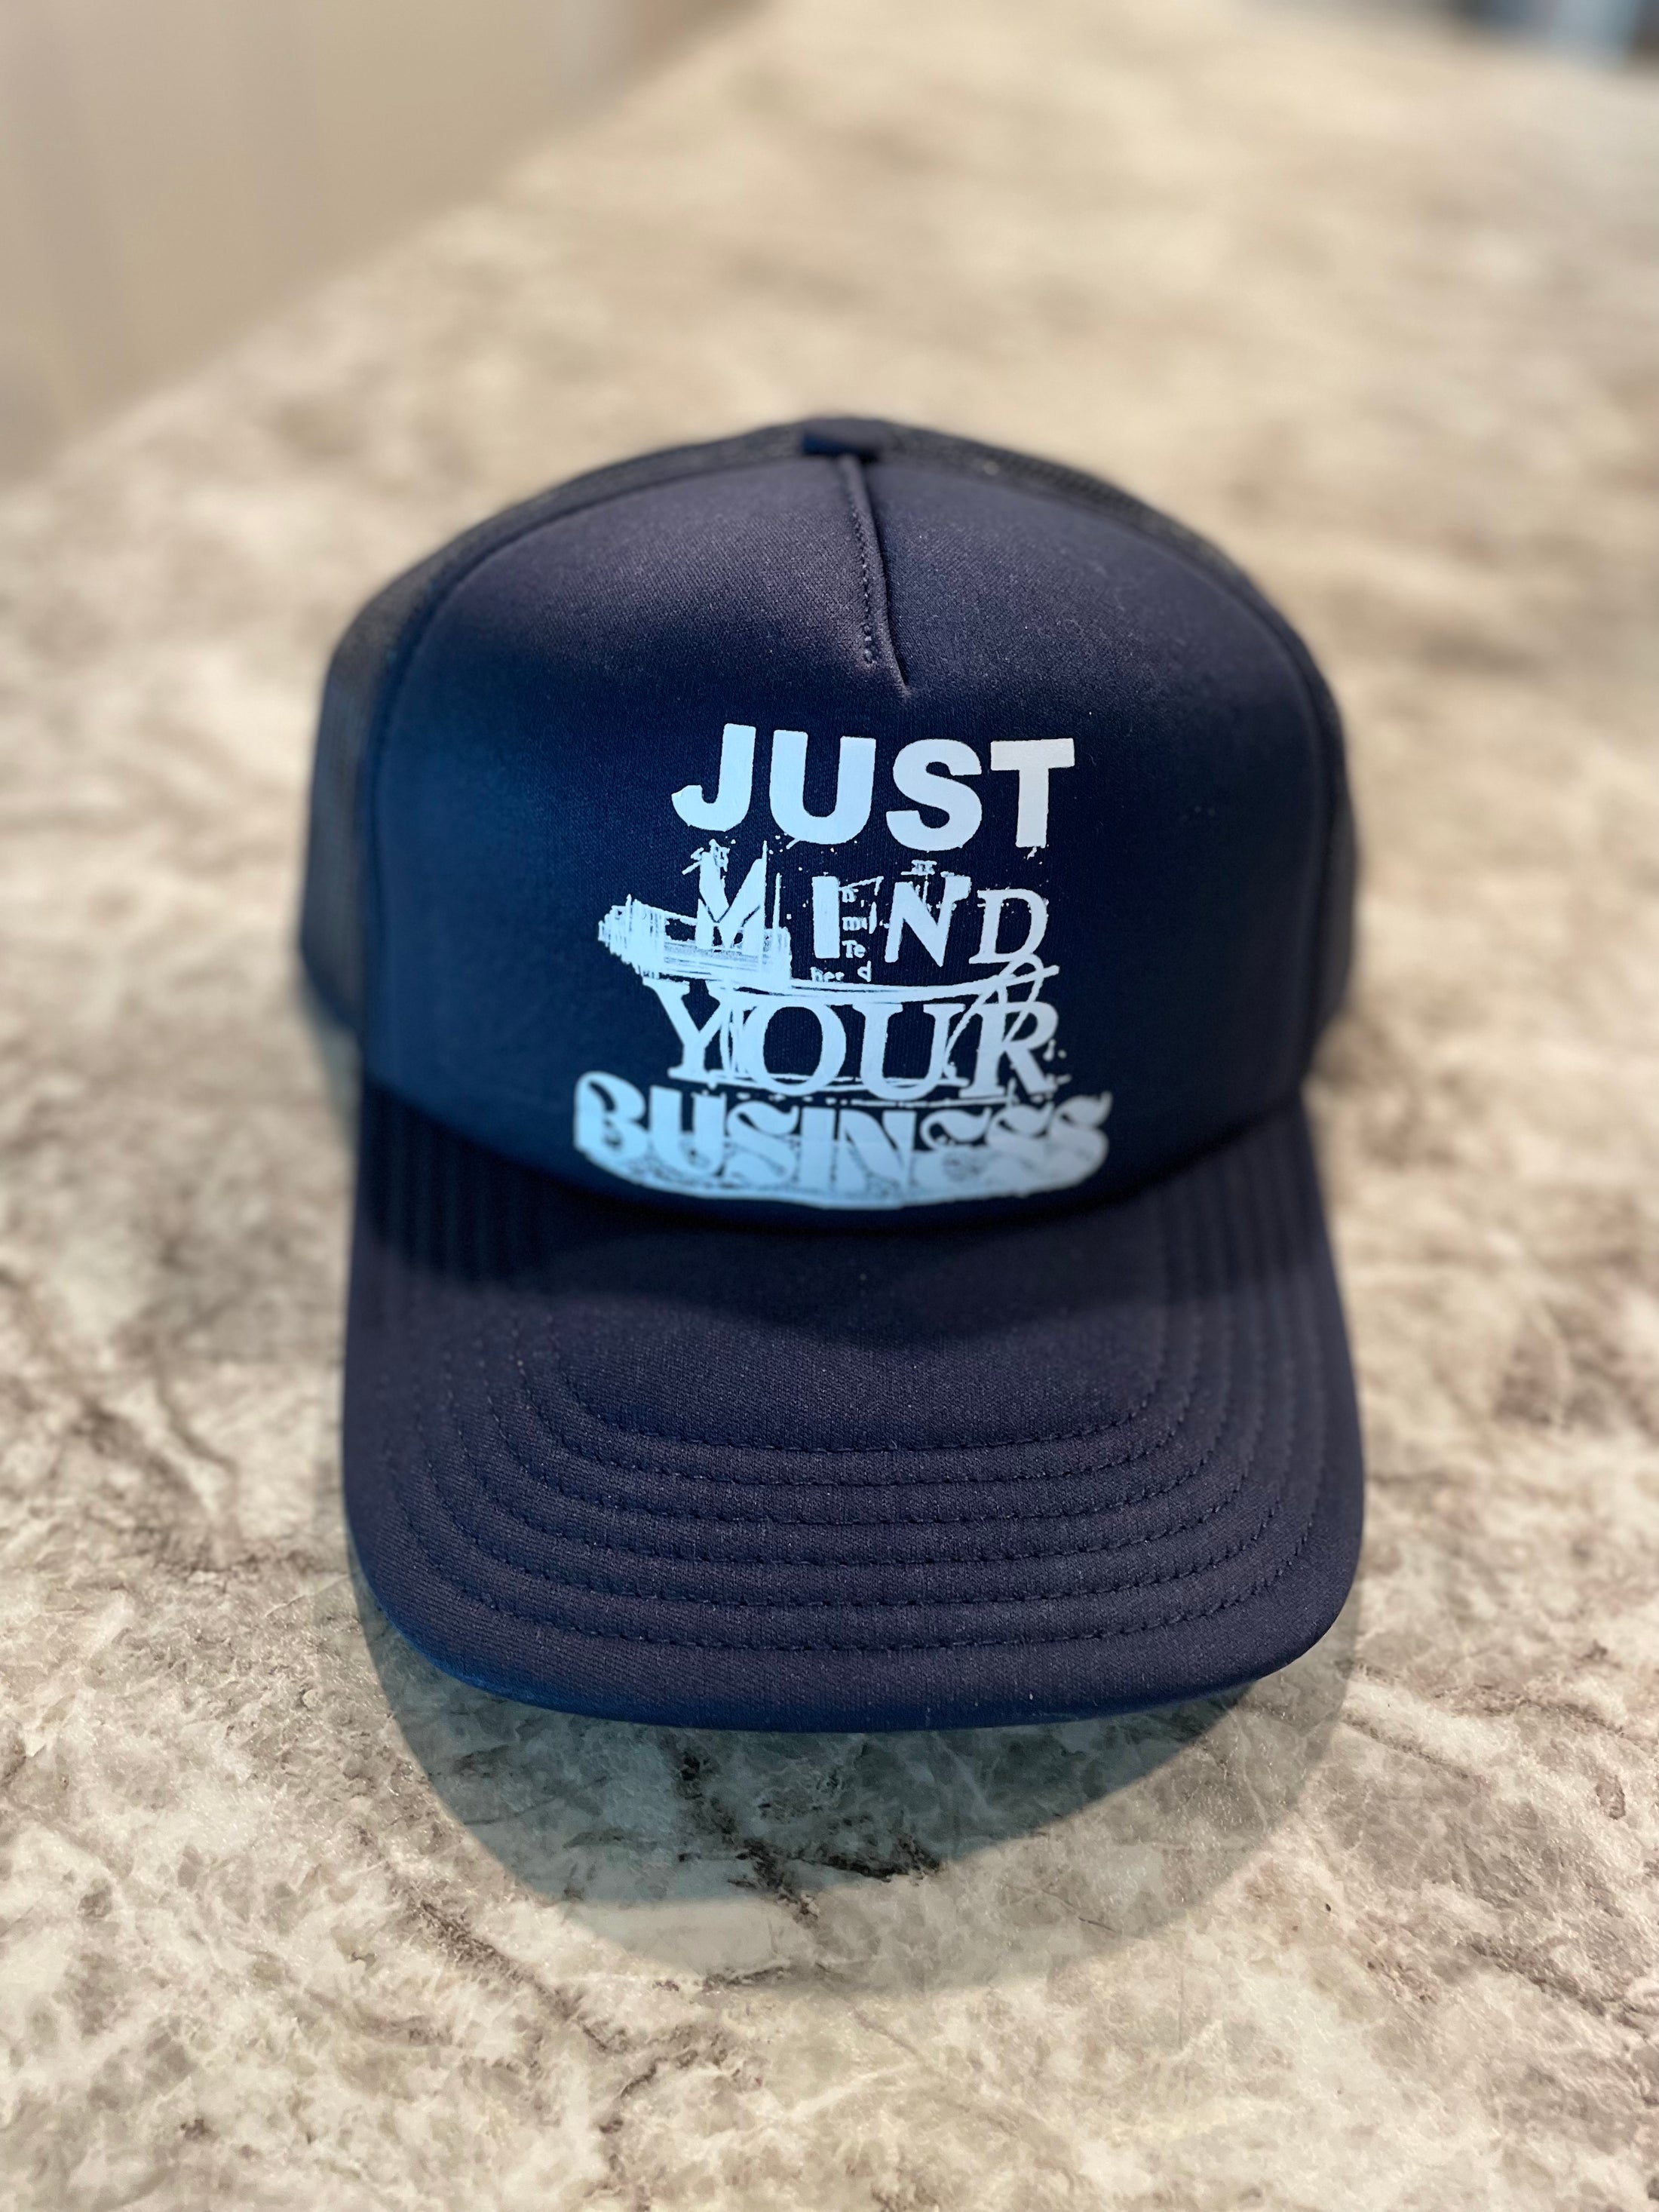 Don’t Let Insecure Thoughts hat